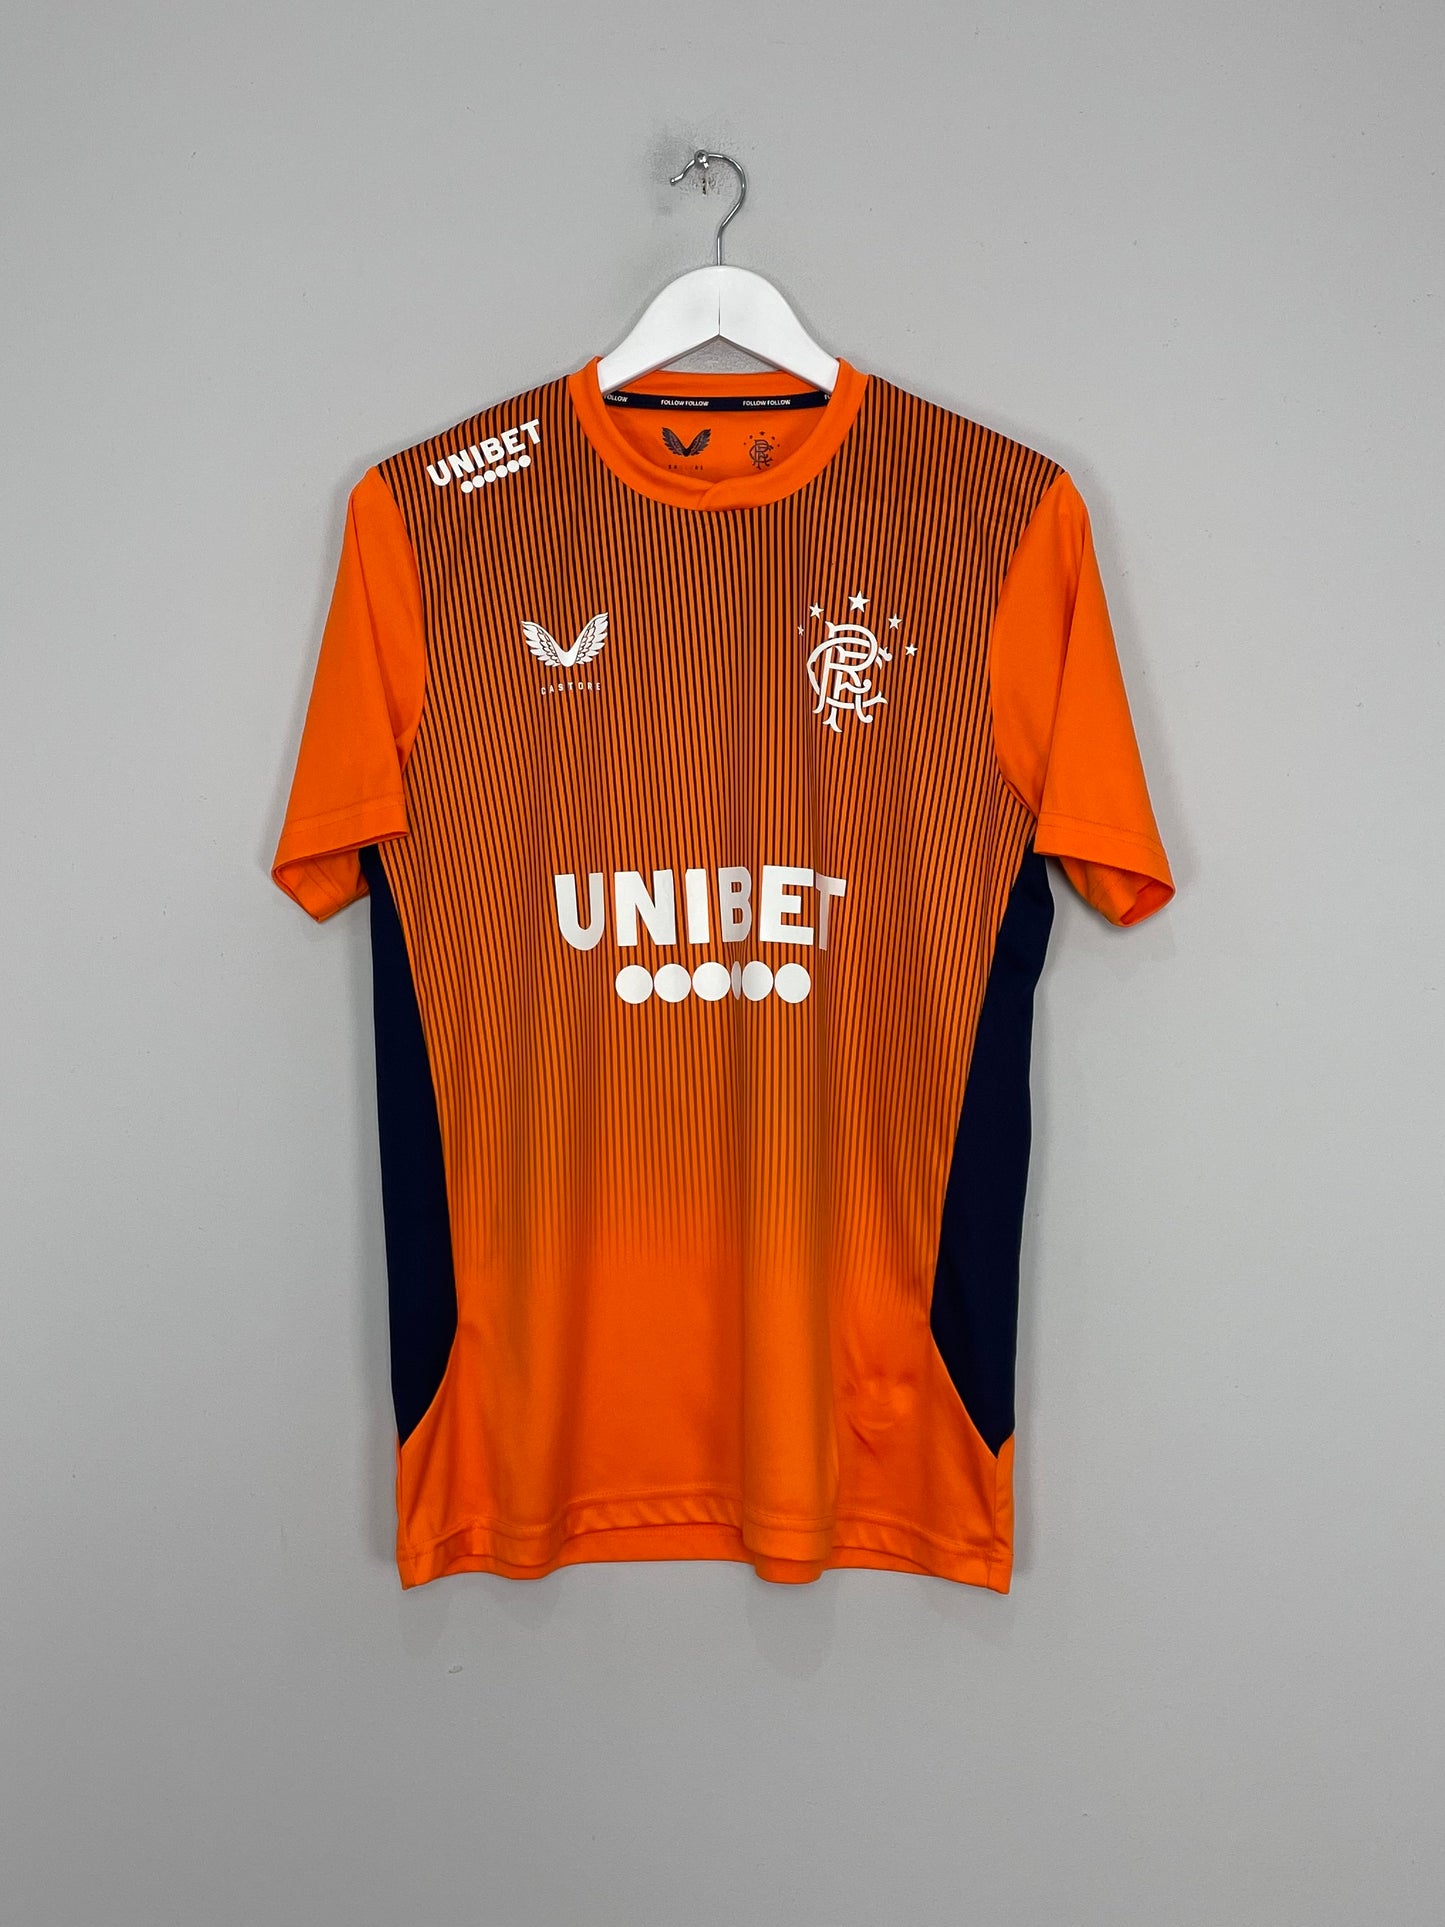 Image of the Rangers shirt from the 2020/22 season